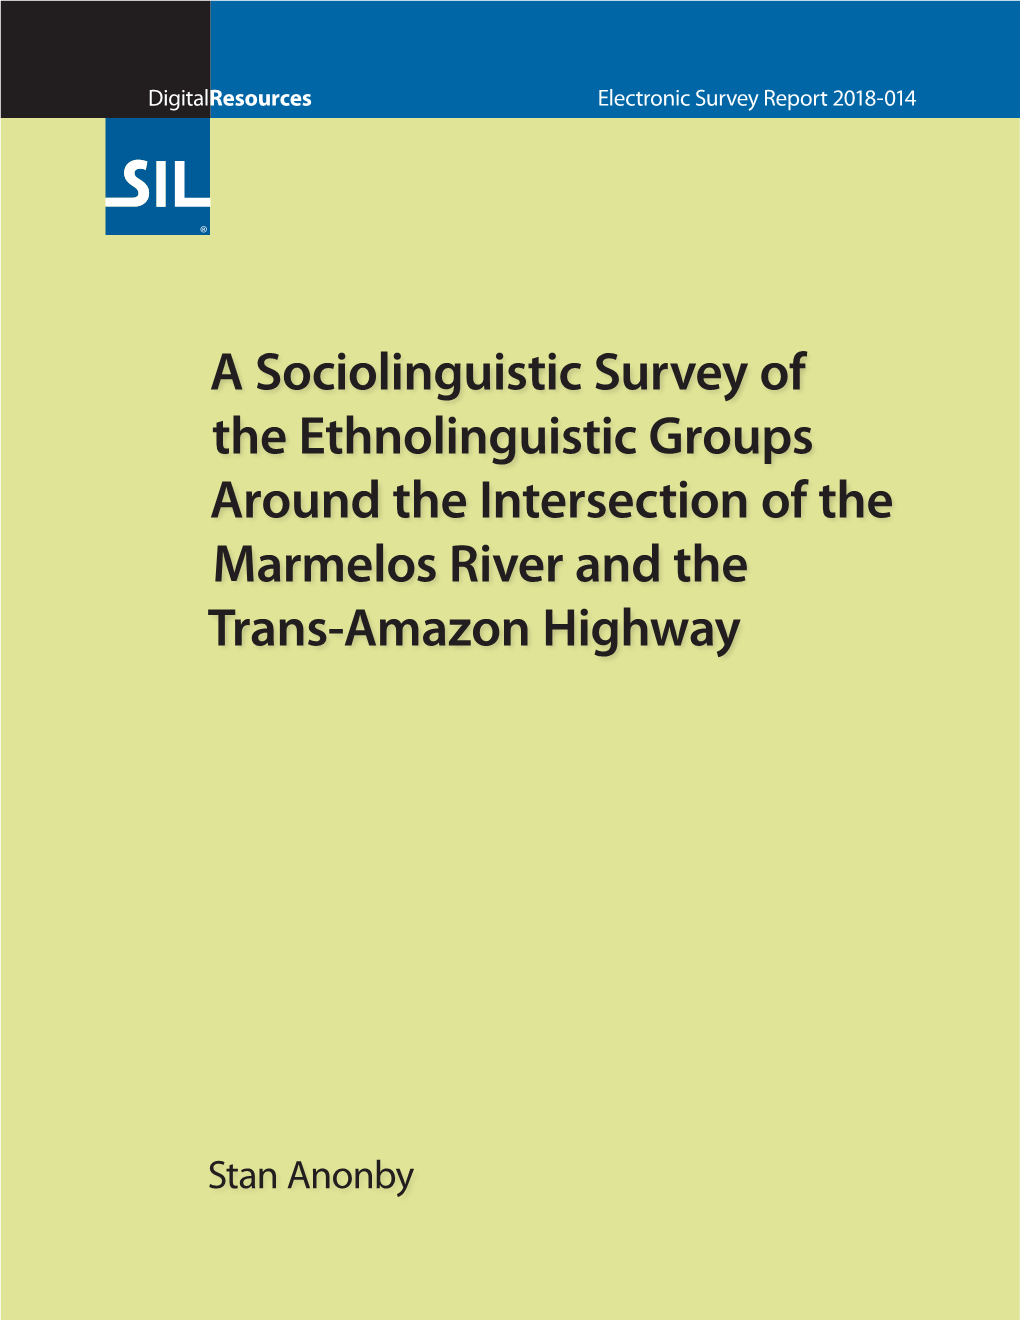 A Sociolinguistic Survey of the Ethnolinguistic Groups Around the Intersection of the Marmelos River and the Trans-Amazon Highway